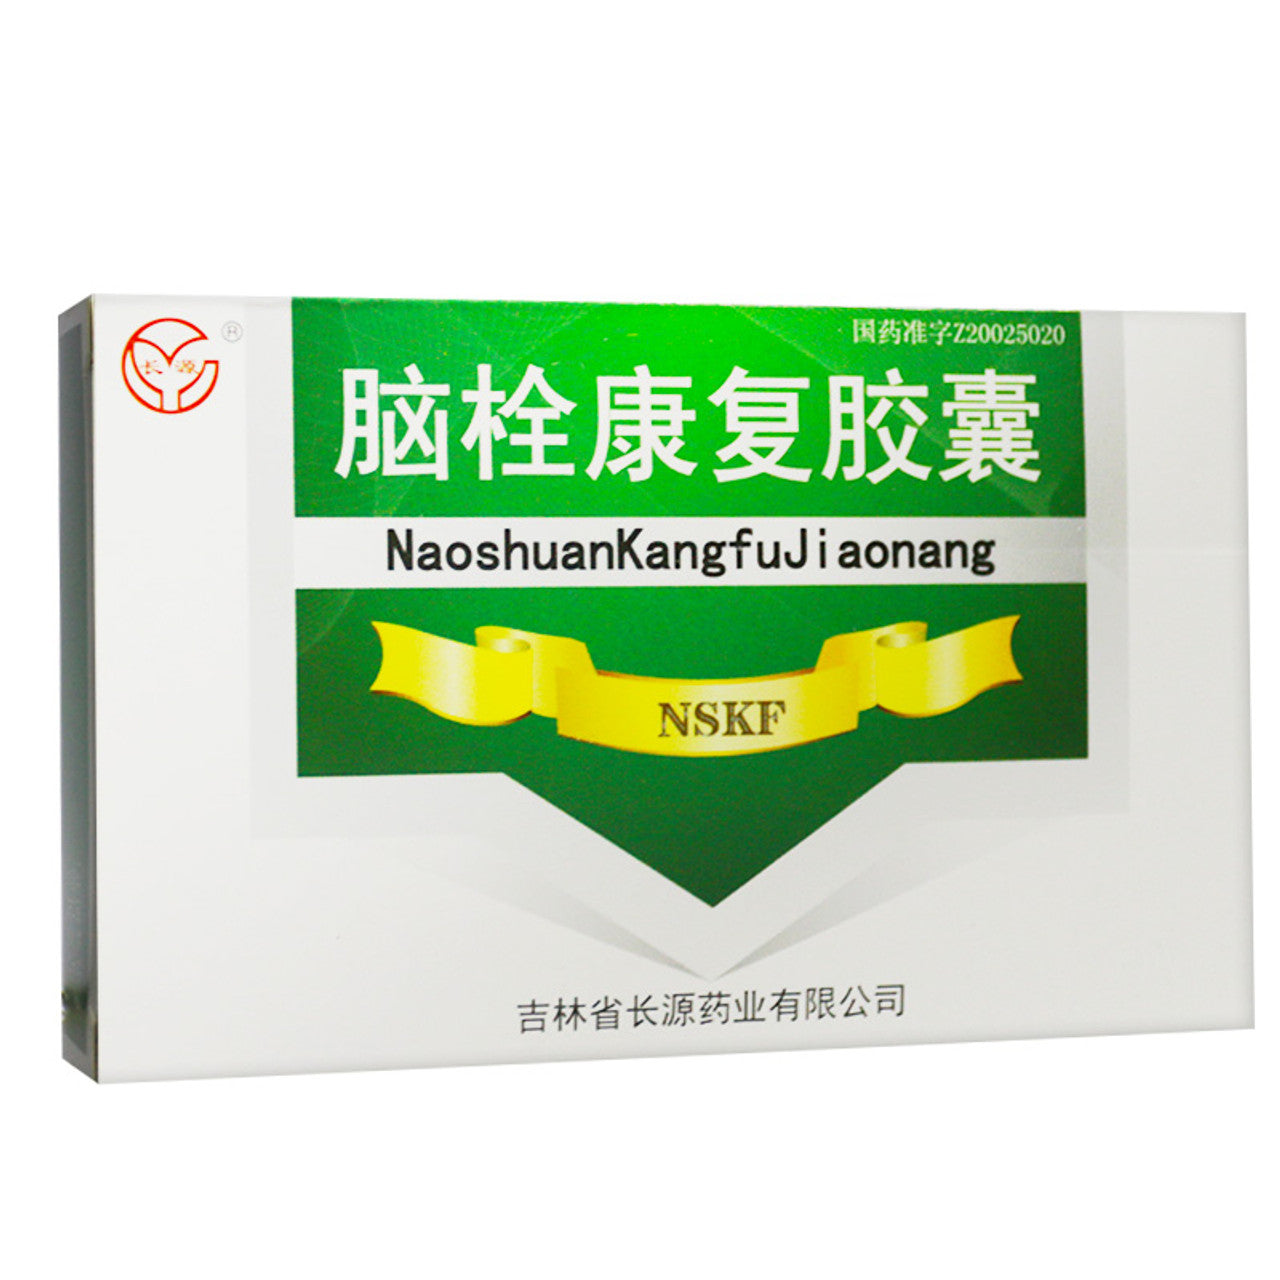 China Herb. Brand Changyuan. Naoshuan Kangfu Jiaonang or NaoshuanKangfuJiaonang or Nao Shuan Kang Fu Jiao Nang or Naoshuan Kangfu Capsules For stroke caused by blood stasis and obstruction of collaterals